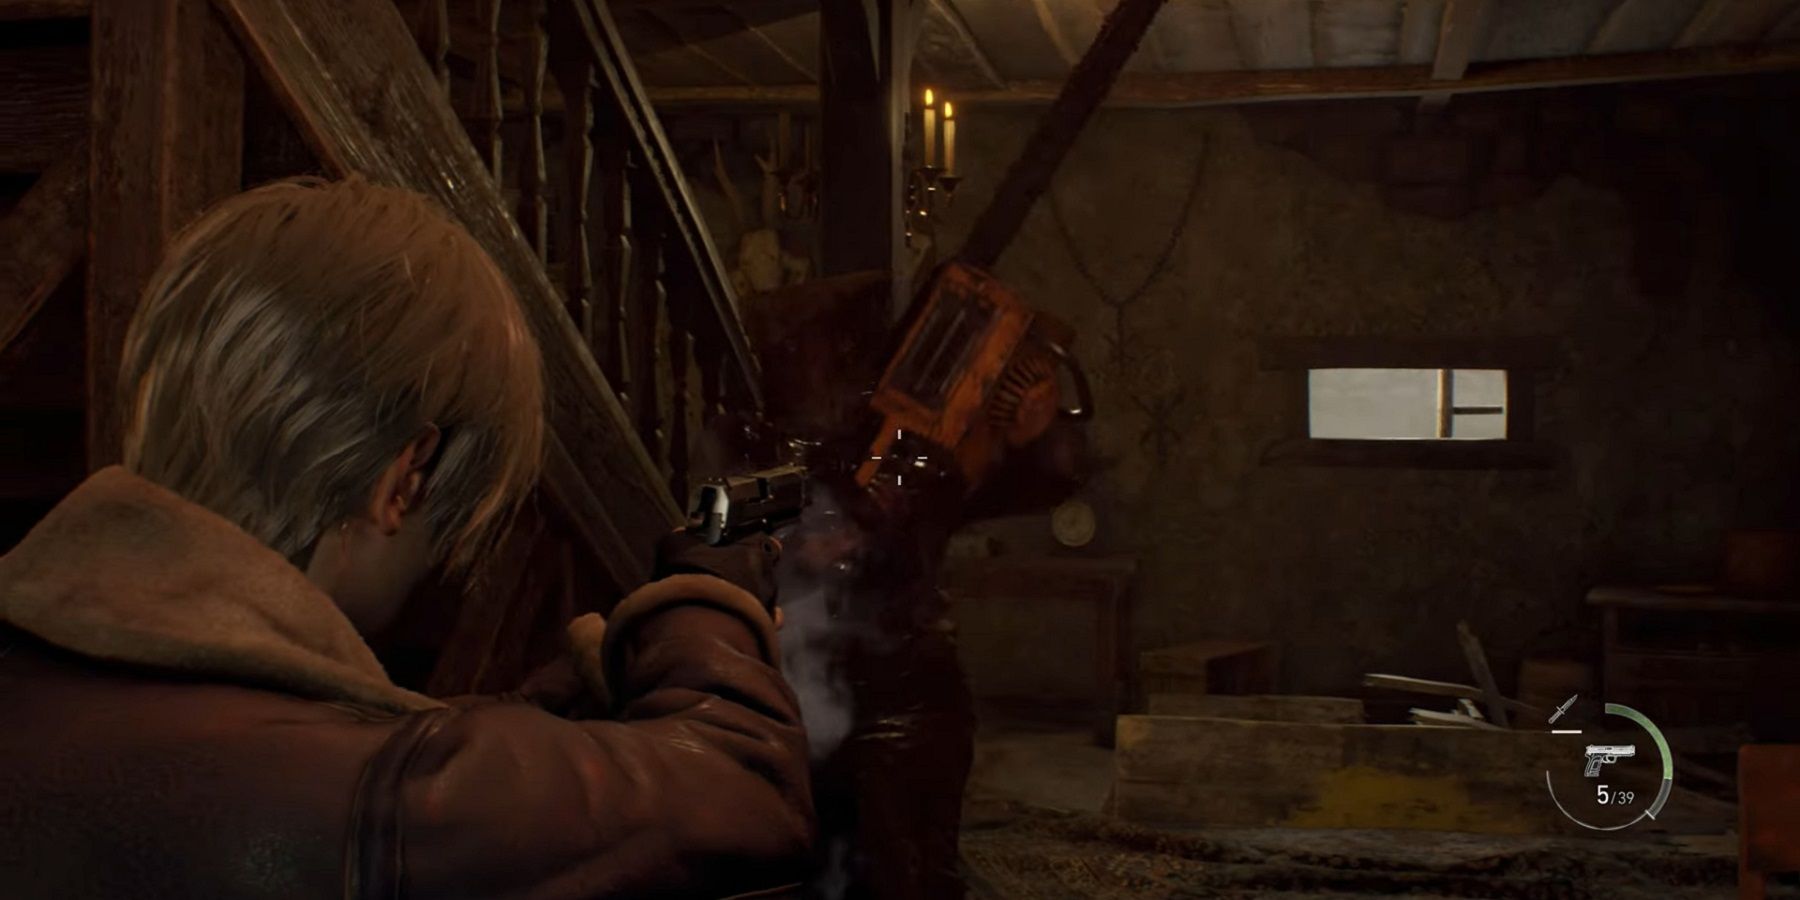 Leon fighting the Chainsaw Ganados in Resident Evil 4 Remake.